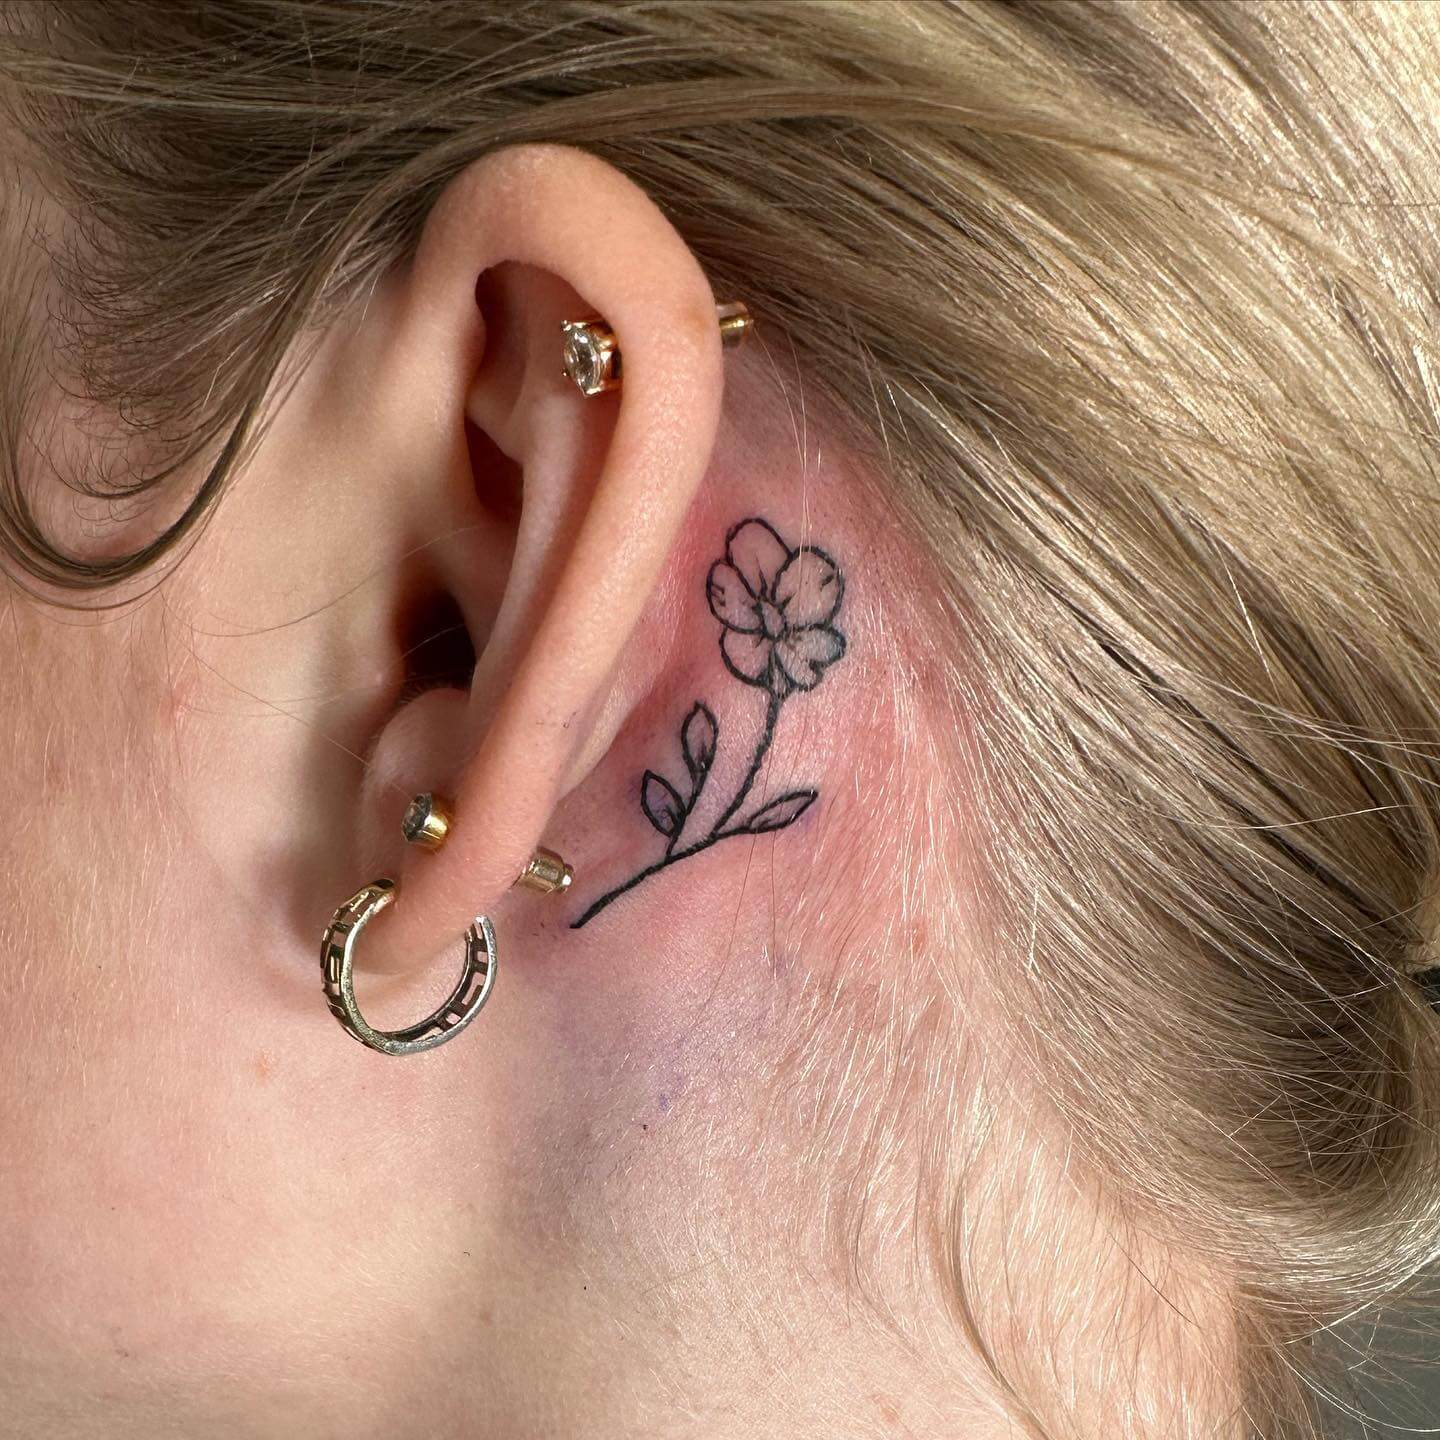 Behind The Ear Flowers Tattoo